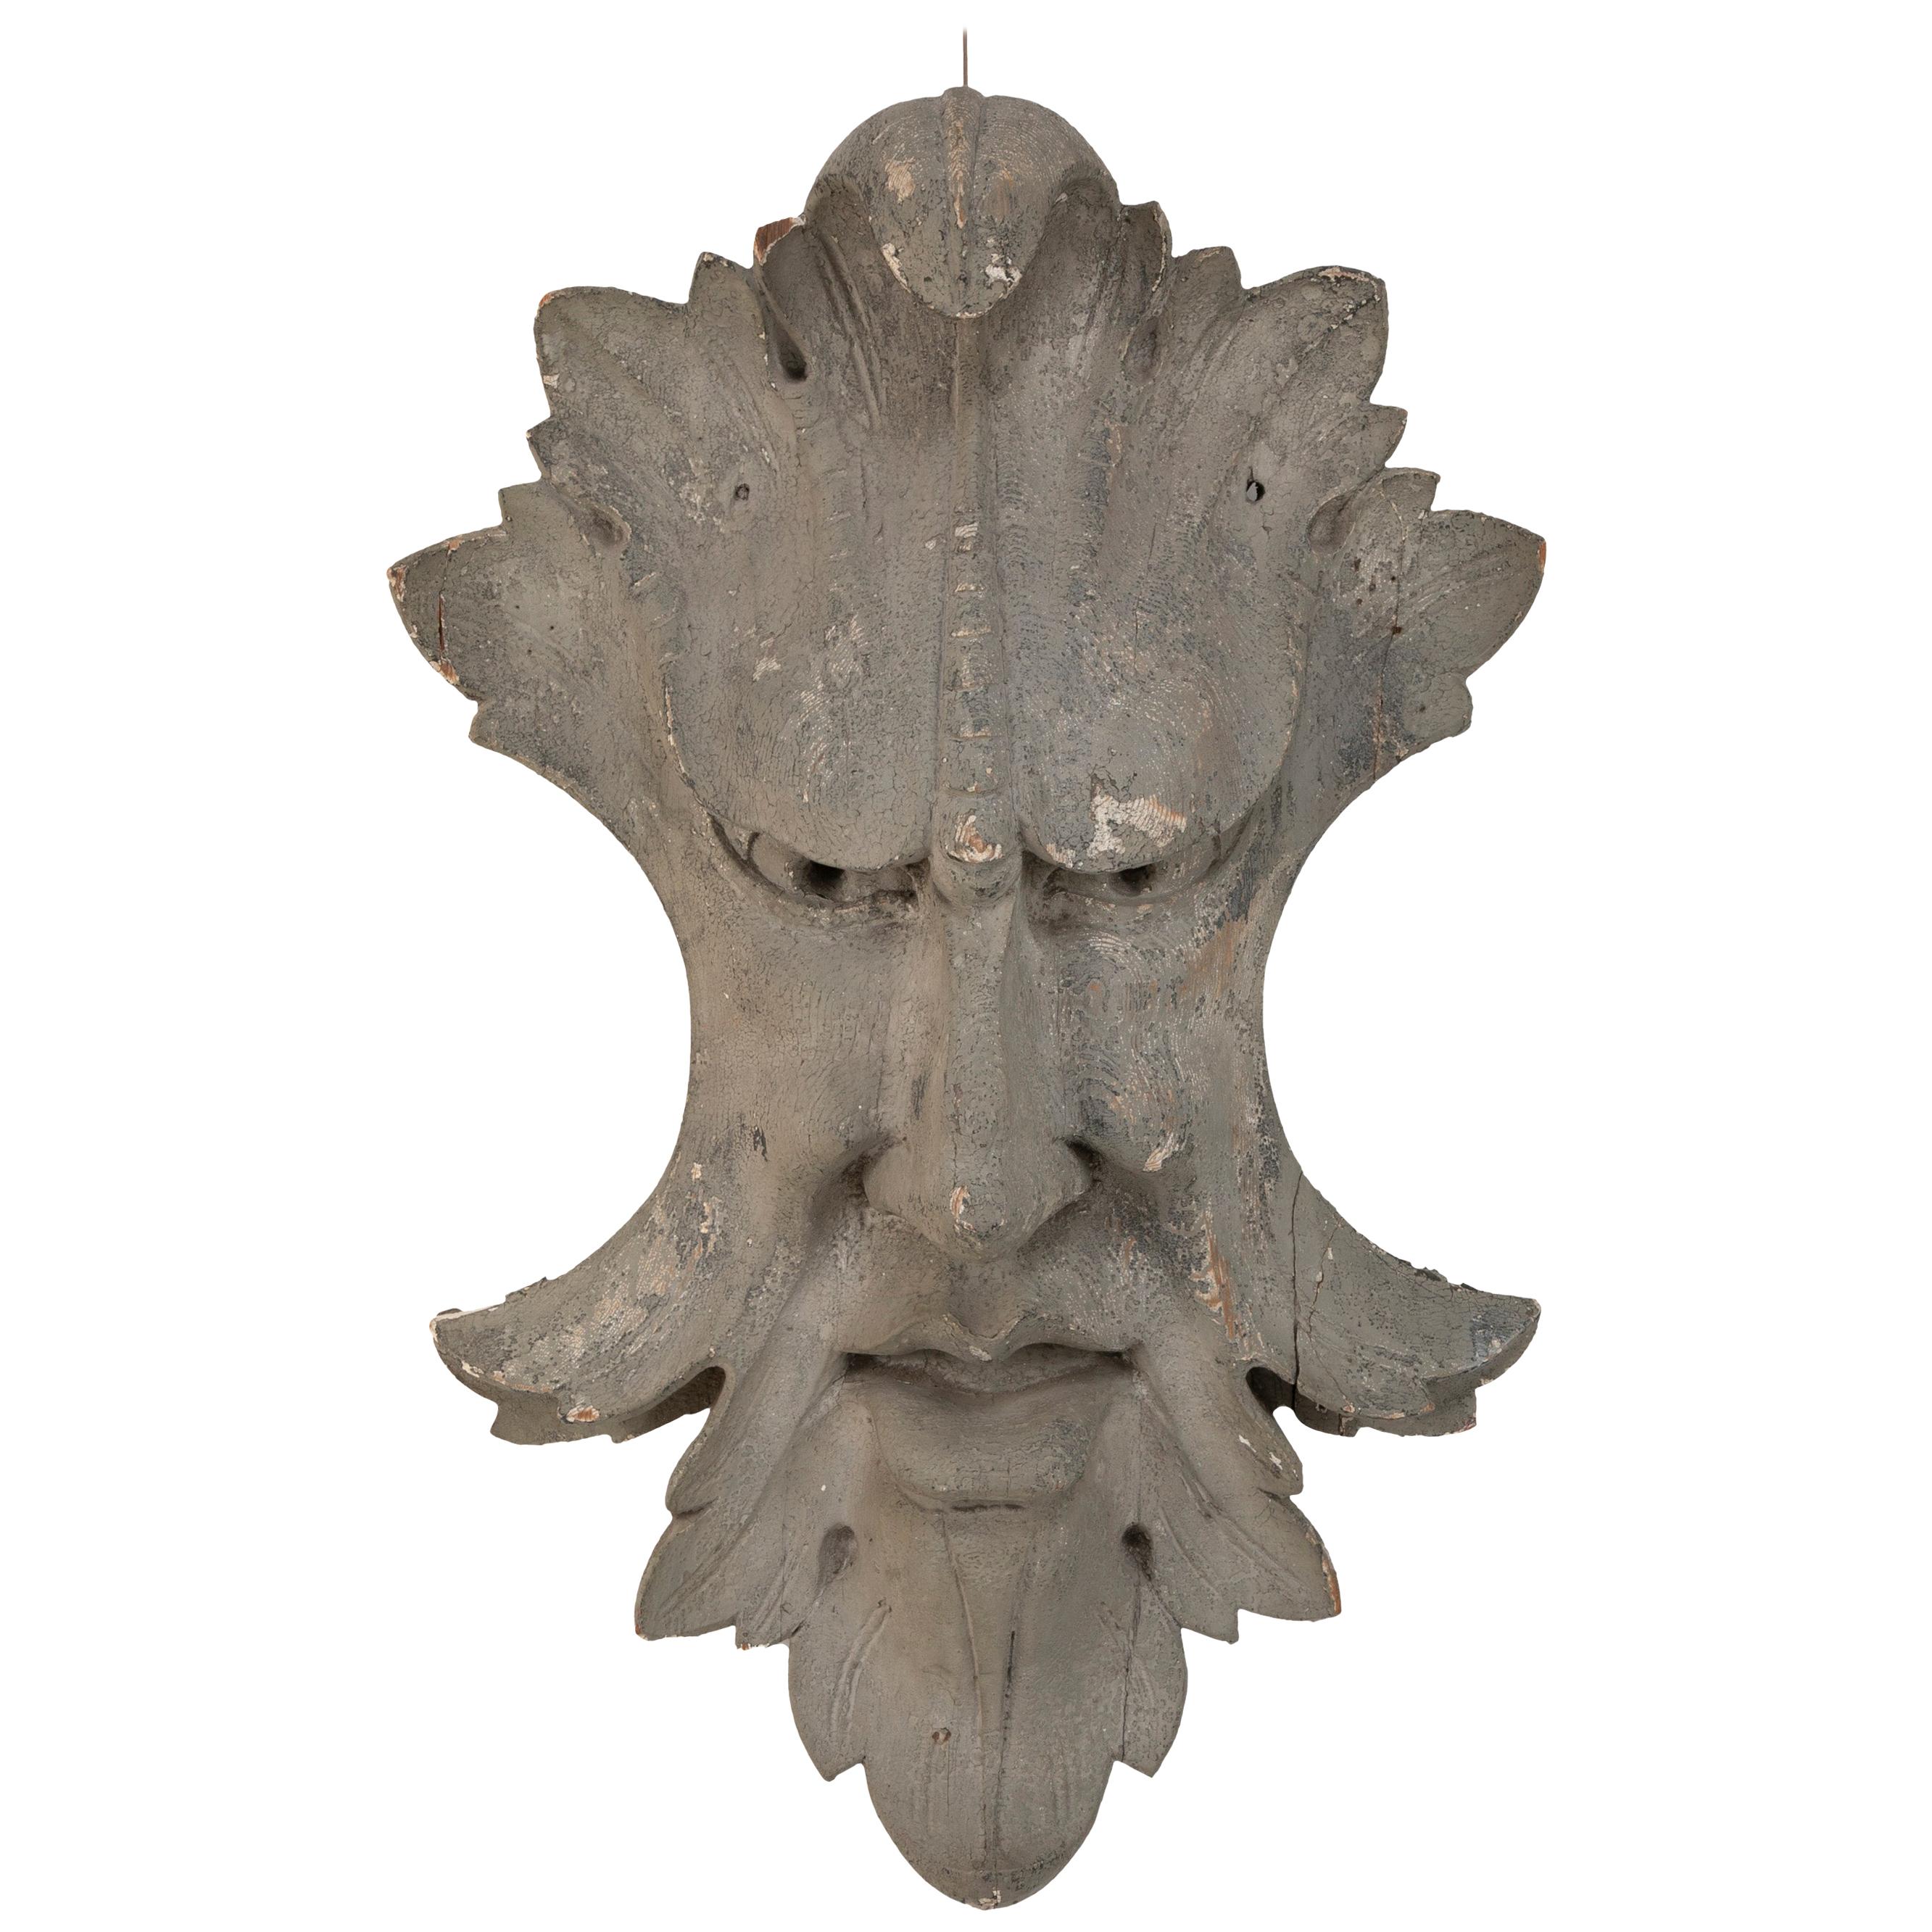 Carved and Painted Wood Architectural Element in the Form of a Mask "Green Man"